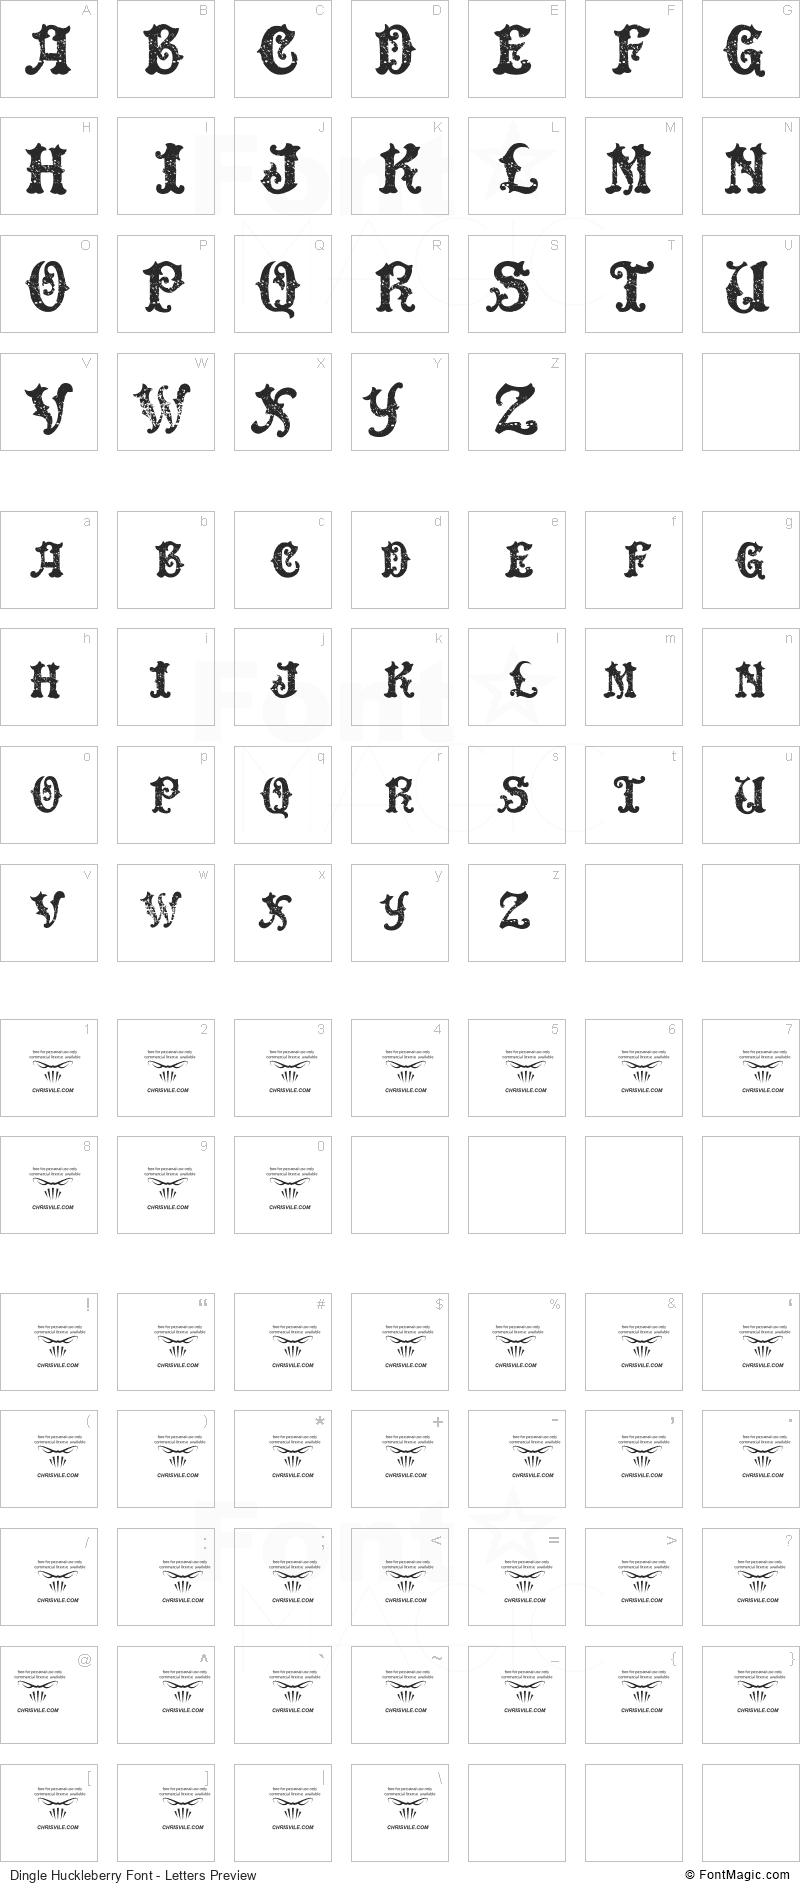 Dingle Huckleberry Font - All Latters Preview Chart